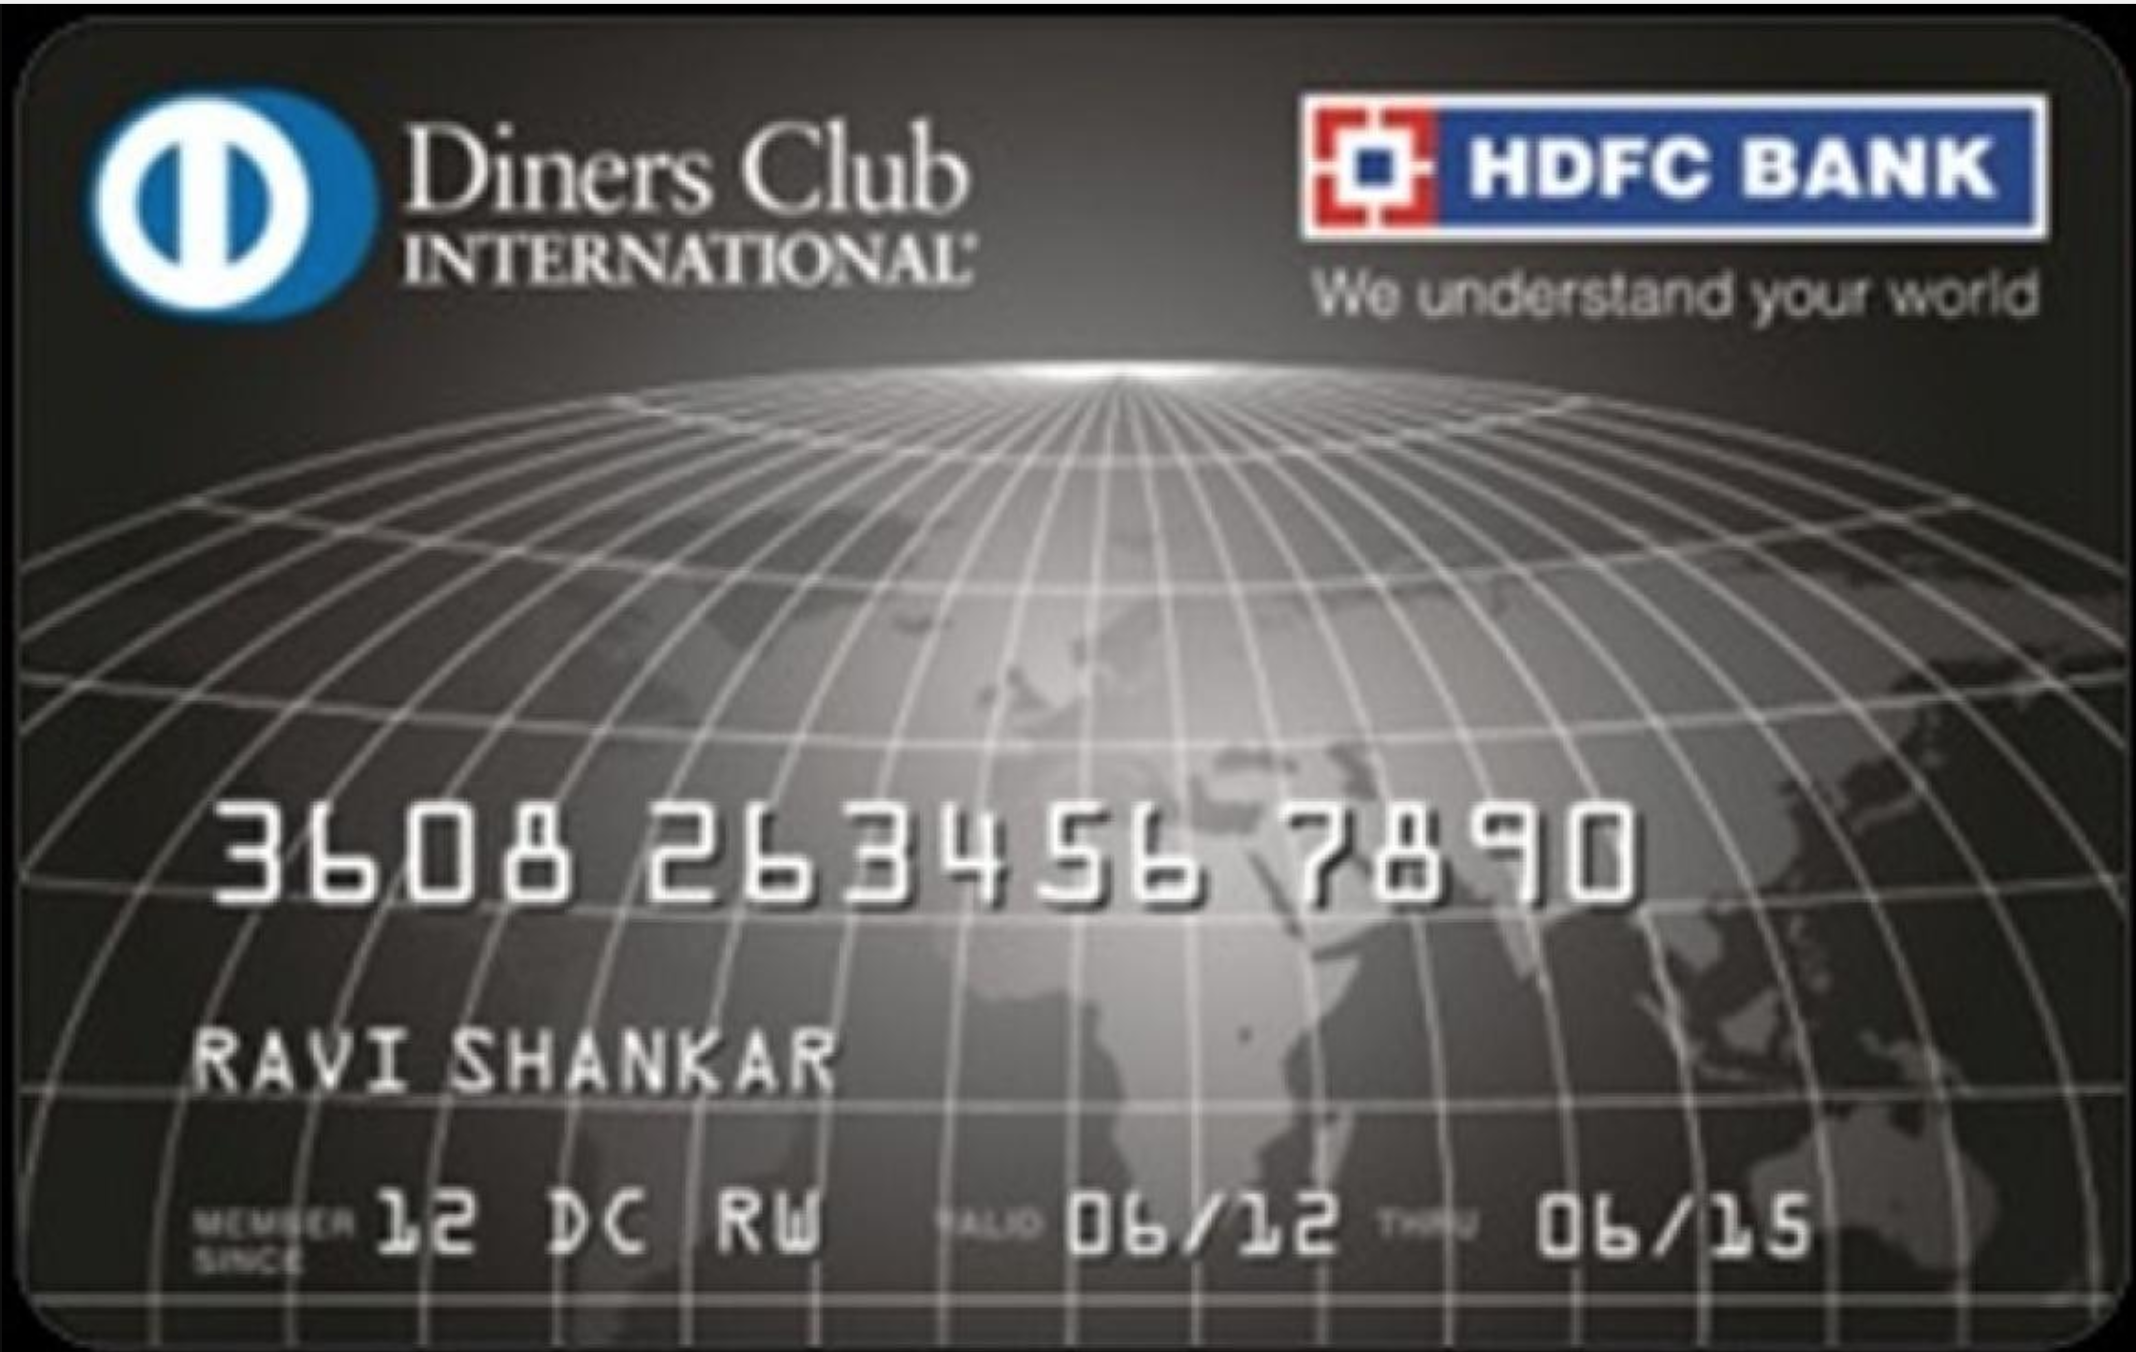 Diners Club cleared by RBI to resume business in India - Live from a Lounge